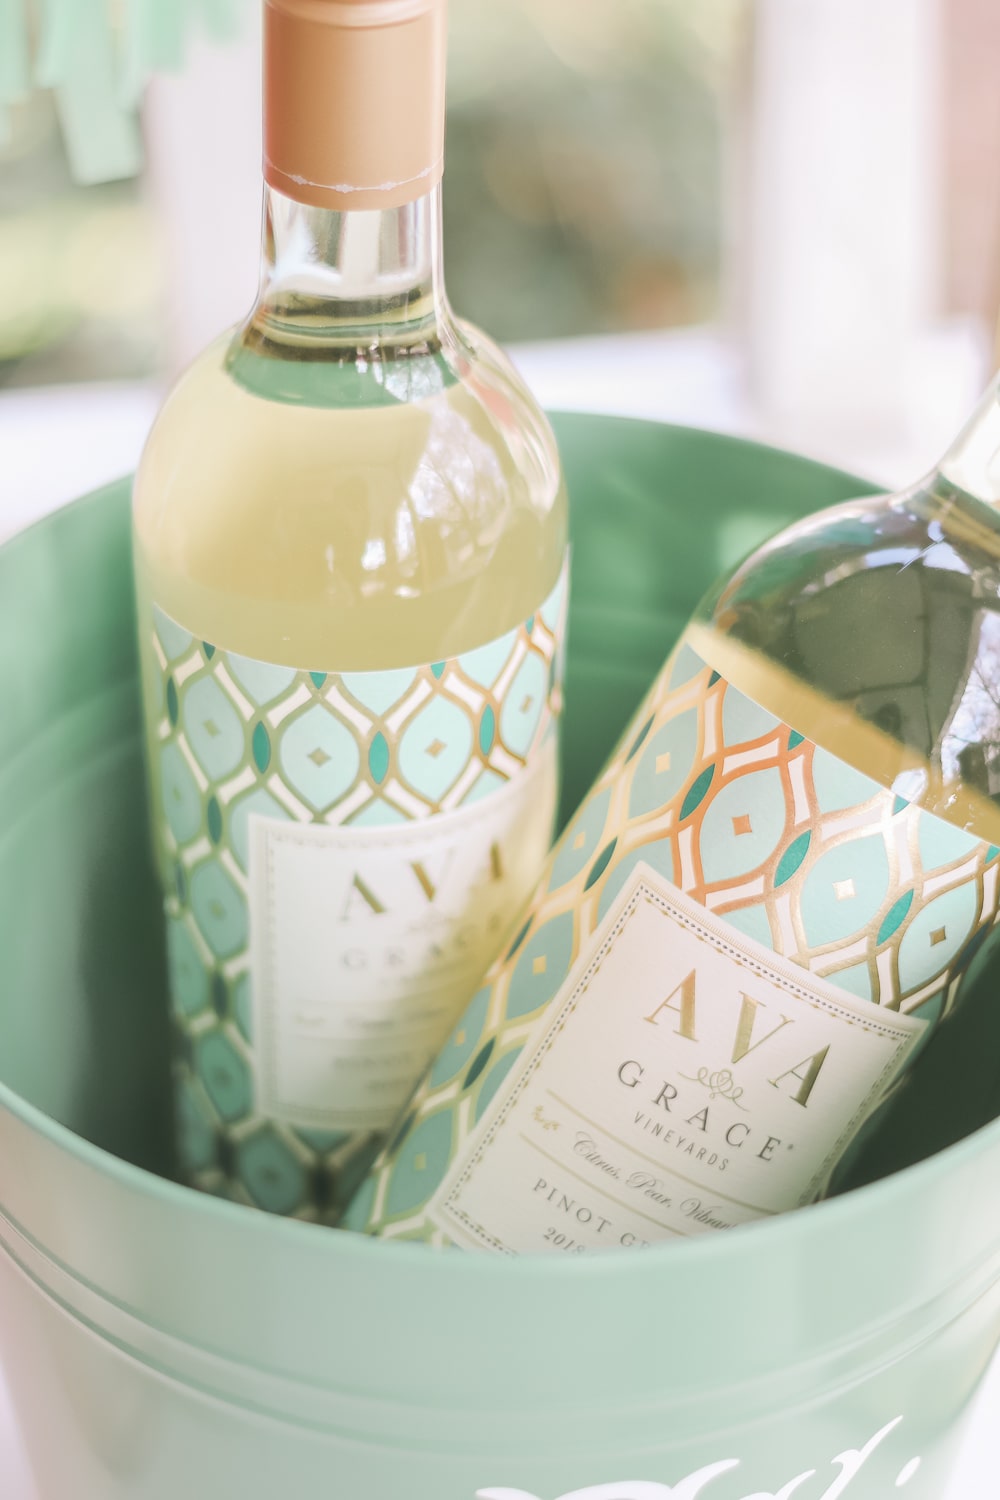 AVA Grace Pinot Grigio in a DIY personalized ice bucket on Diary of a Debutante